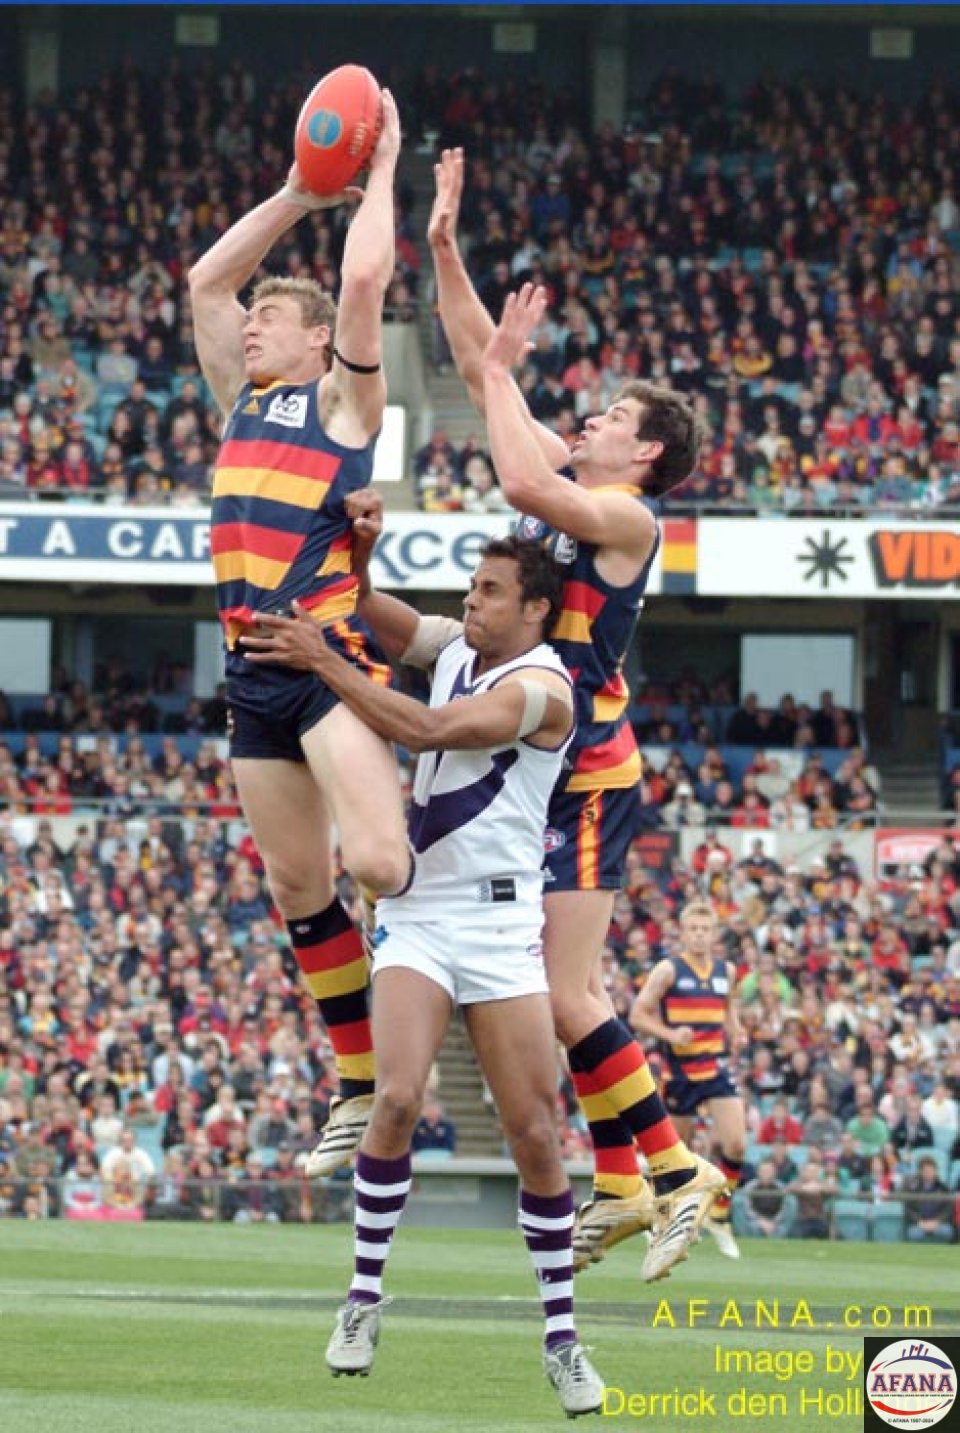 [b]Adelaide Crows stand-in captain Simon Goodwin marks ahead of the pack[/b]